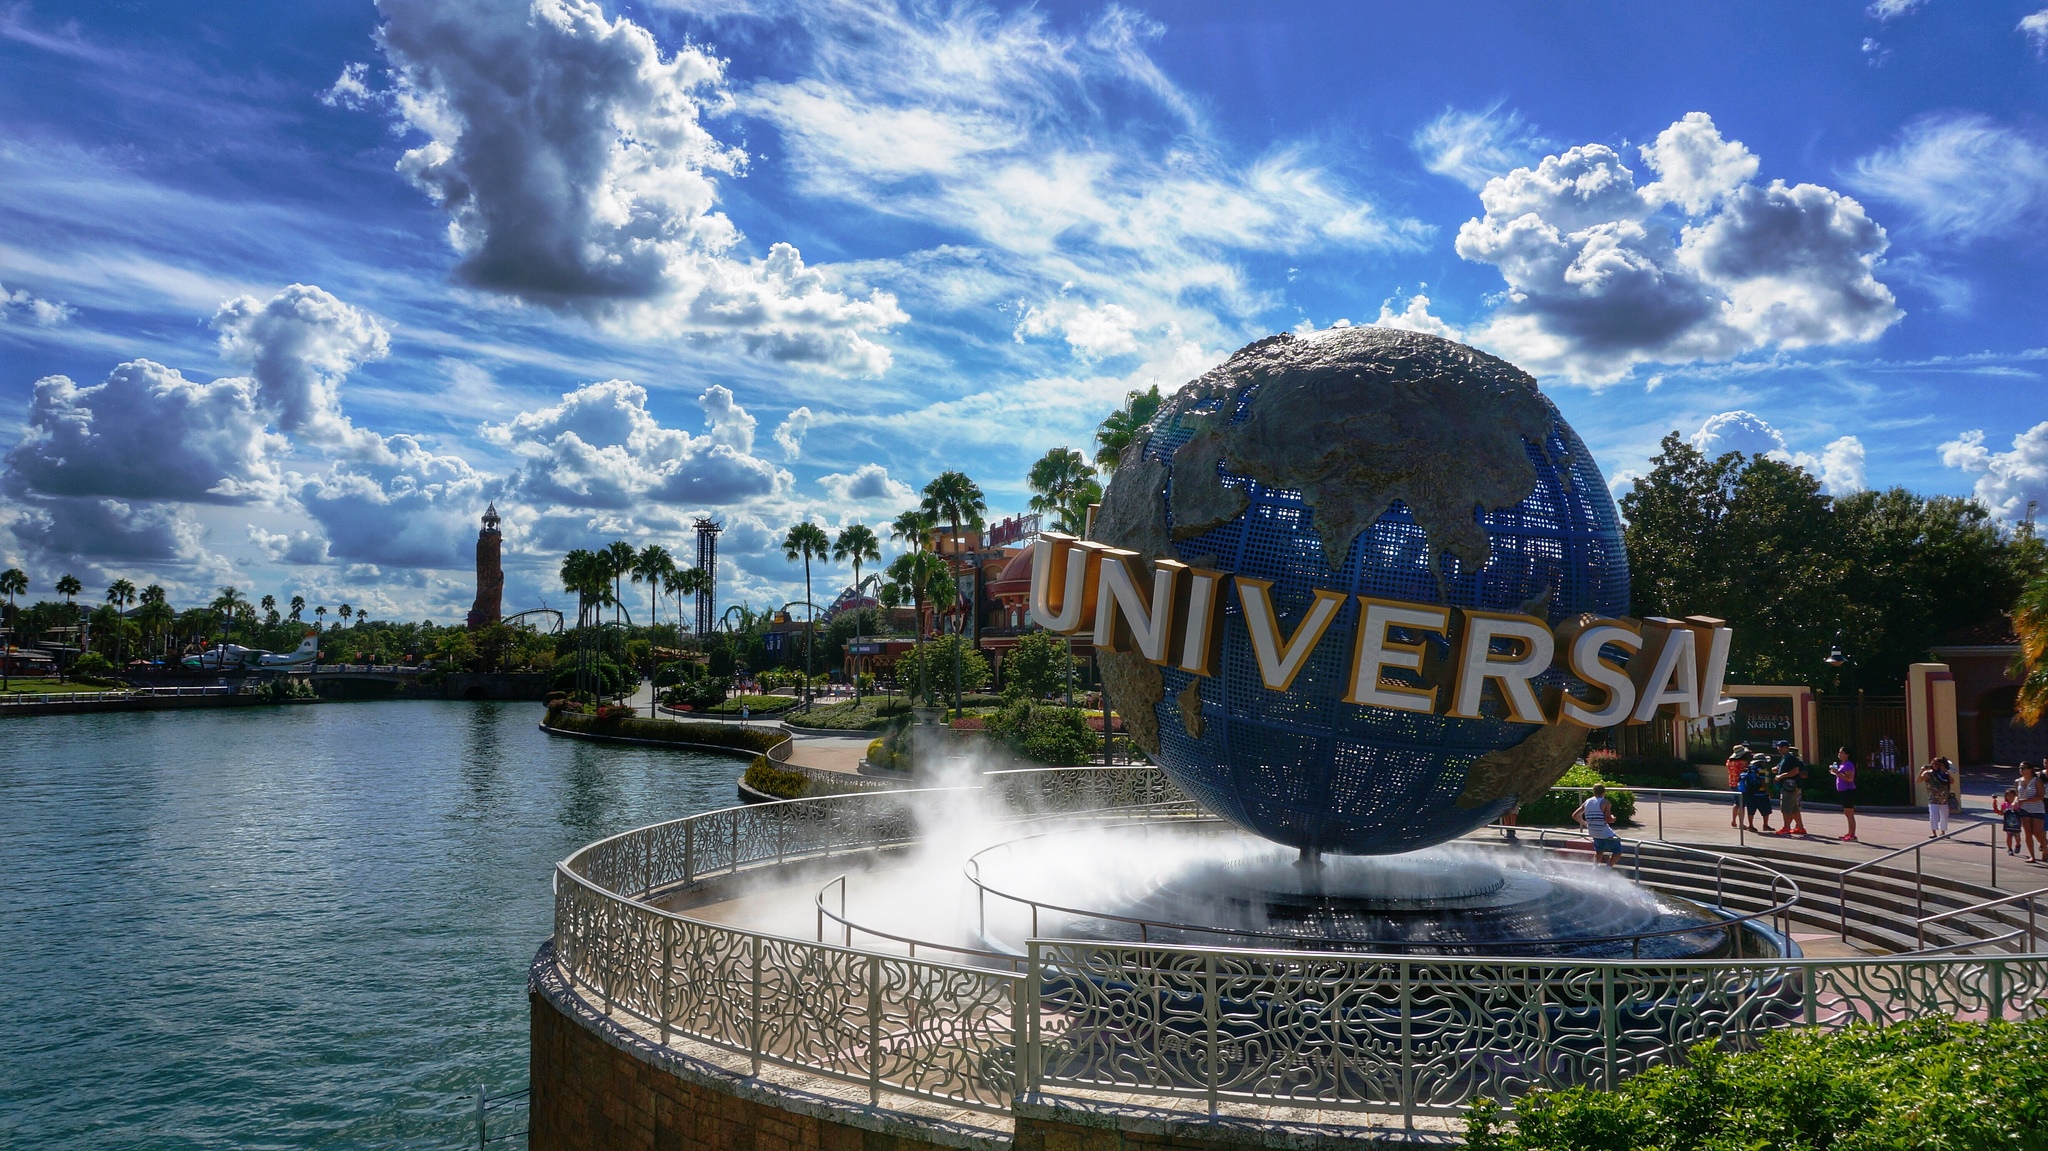 WDW News Today - PHOTO: Universal Orlando Resort Raises Prime Parking Rate  by $10